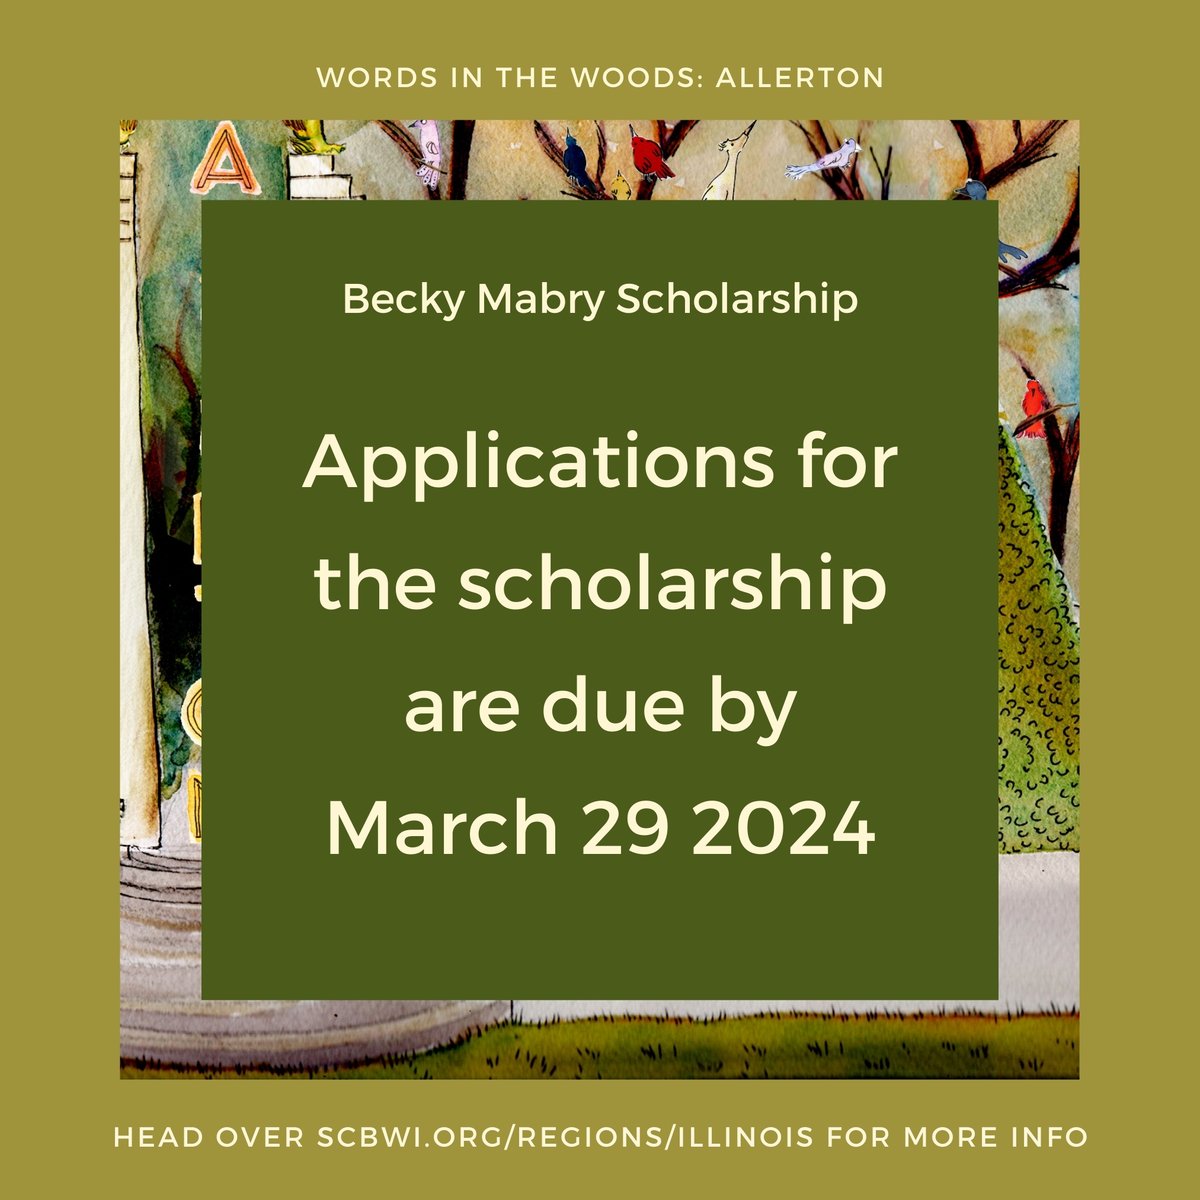 The Becky Mabry Scholarship is awarded to one attendee looking for an opportunity to cover the attendance fee for Words In The Woods: Allerton. You have until March 29, 2024, to apply; the winner will be announced on April 1. Info to apply is on scbwi.org/regions/illino…